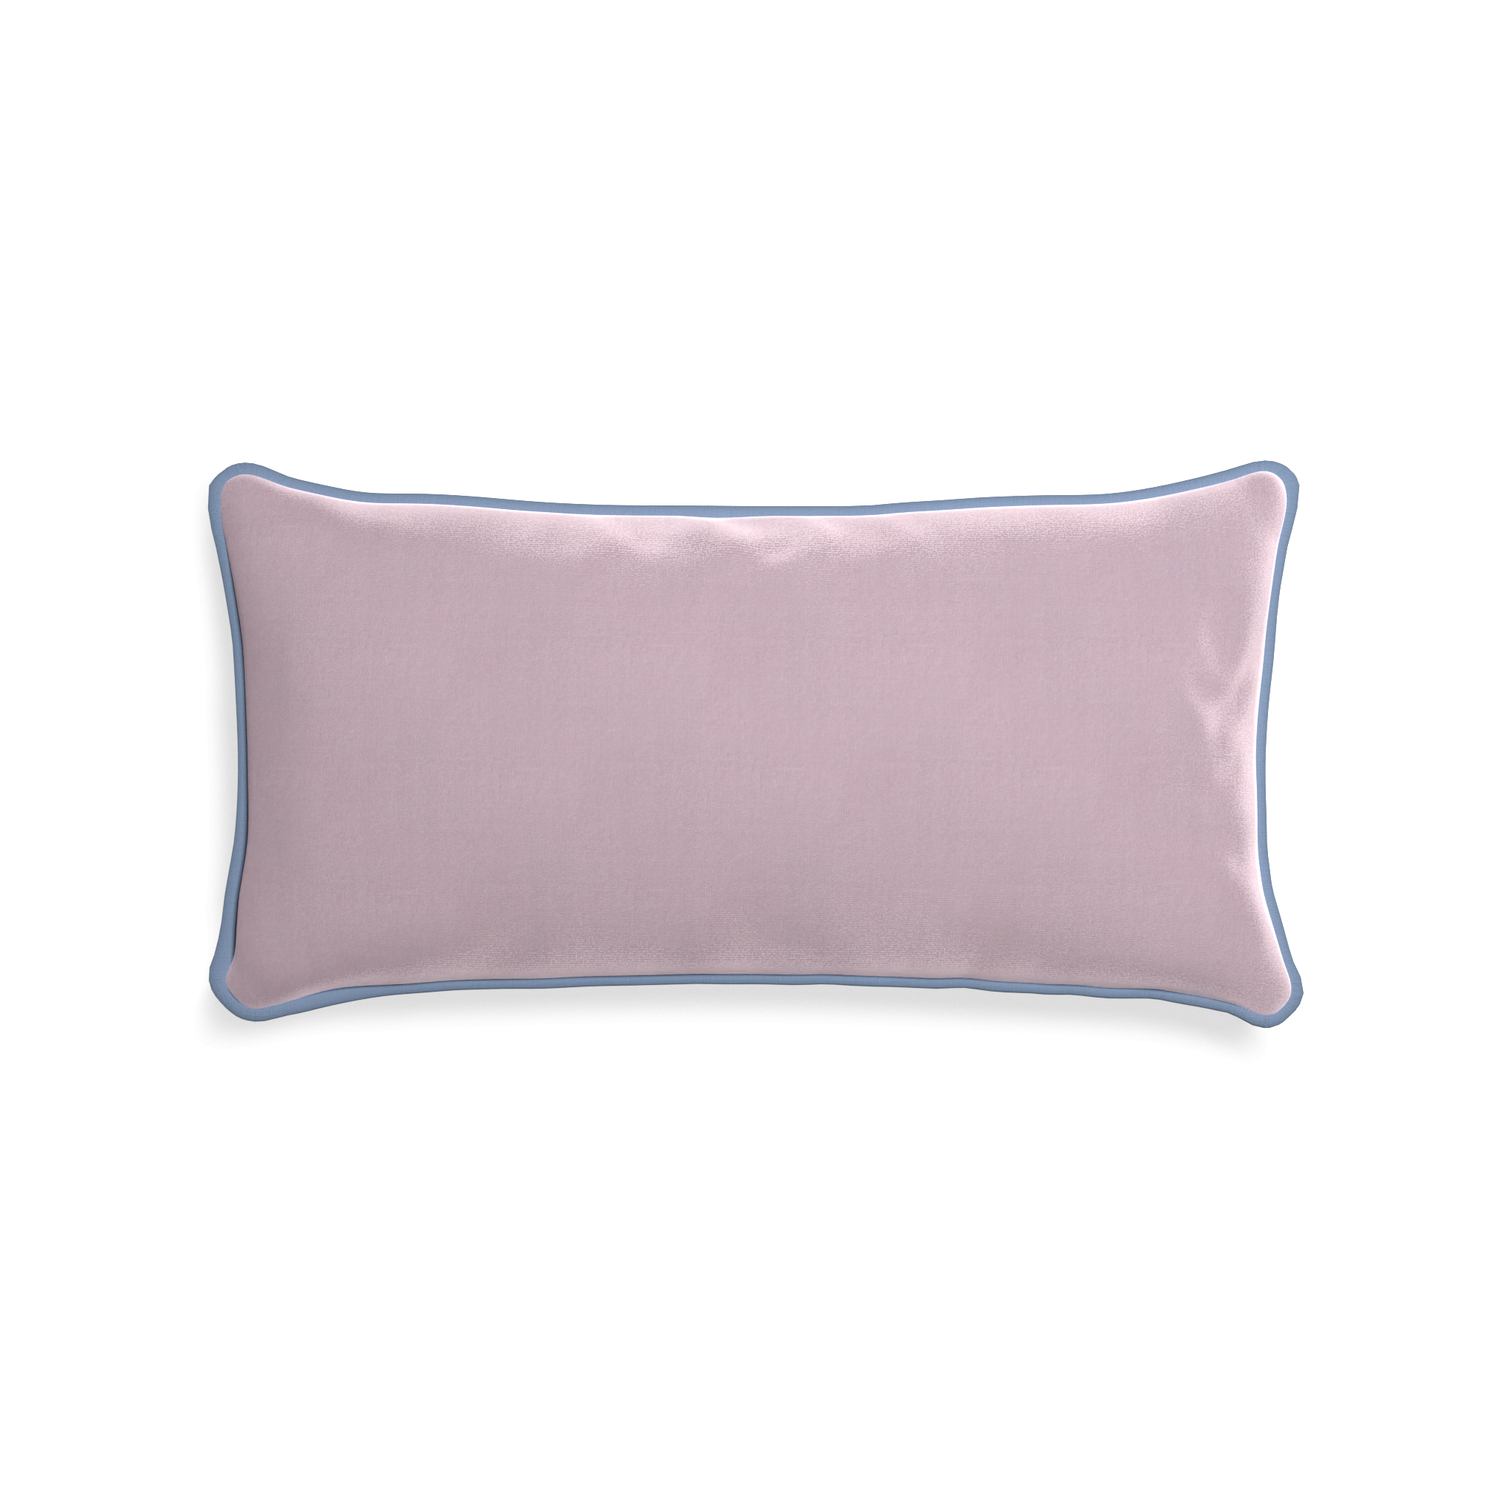 Midi-lumbar lilac velvet custom lilacpillow with sky piping on white background